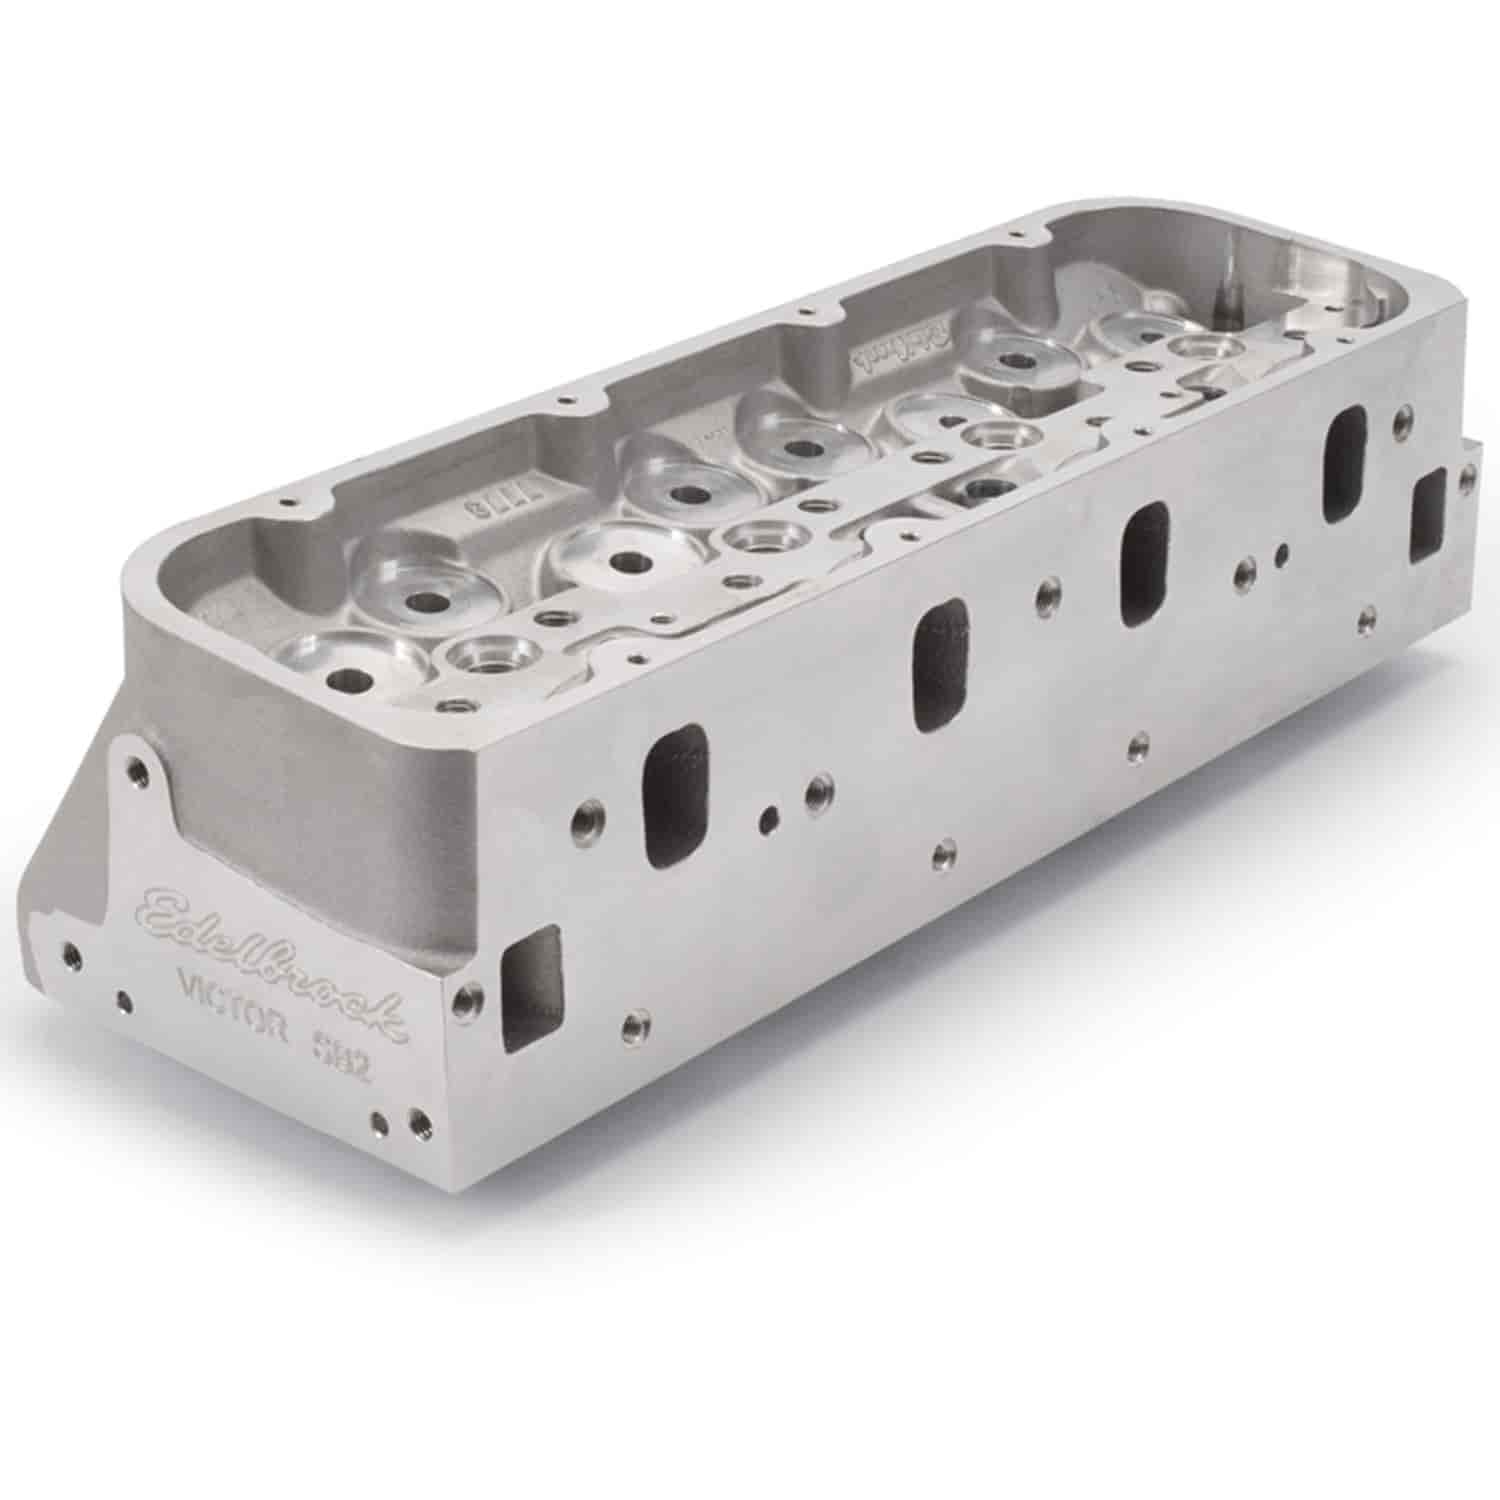 Pro Port Raw Victor SB2 Cylinder Head for Small Block Chevy